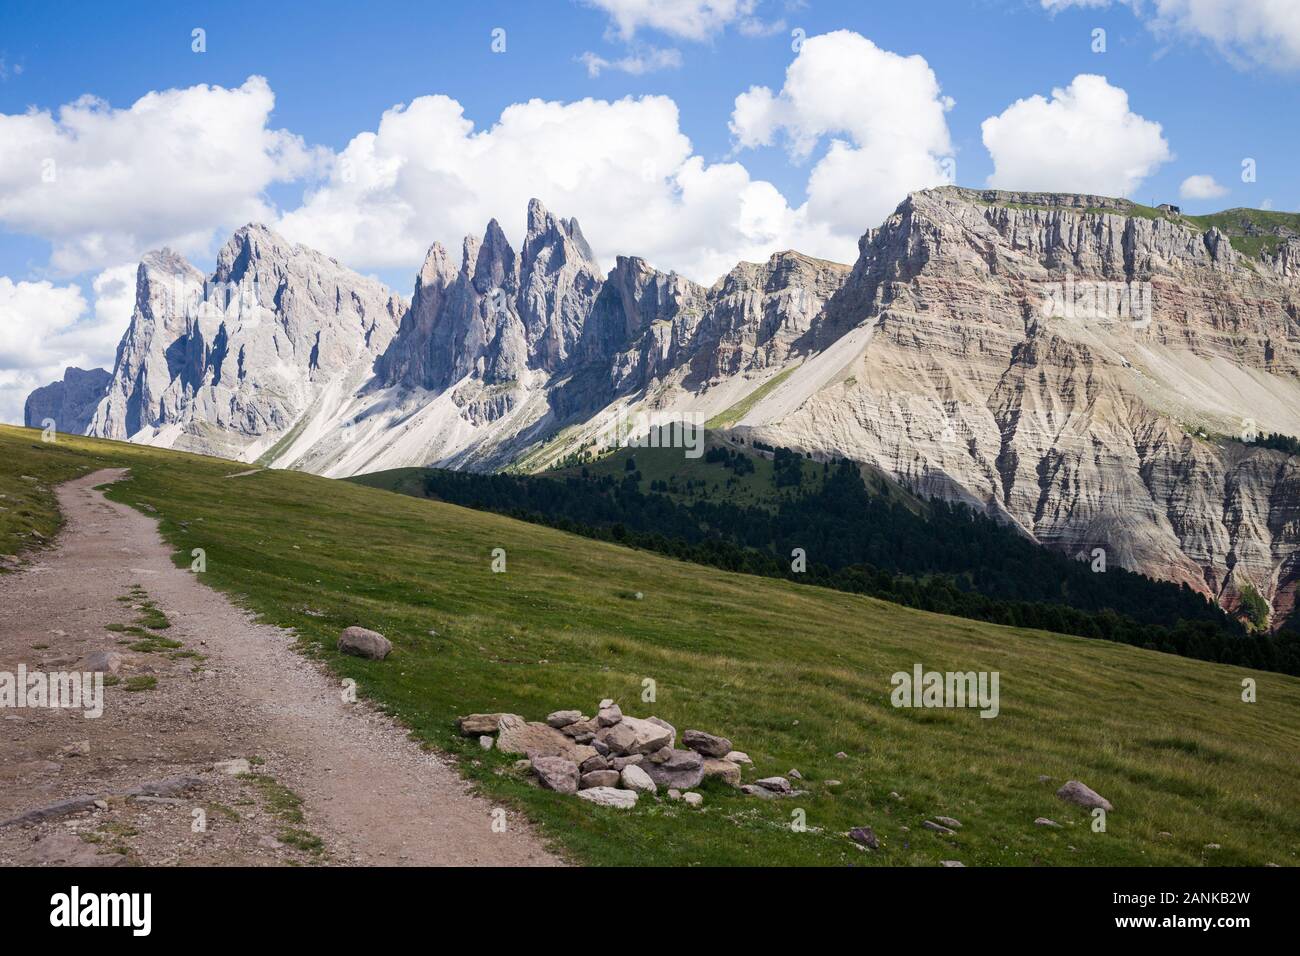 View towards Seceda and Sass Rigais from Resciesa / Ciampanil de Cuecnes, near Ortisei, in the Dolomites, South Tyrol, Italy. Stock Photo